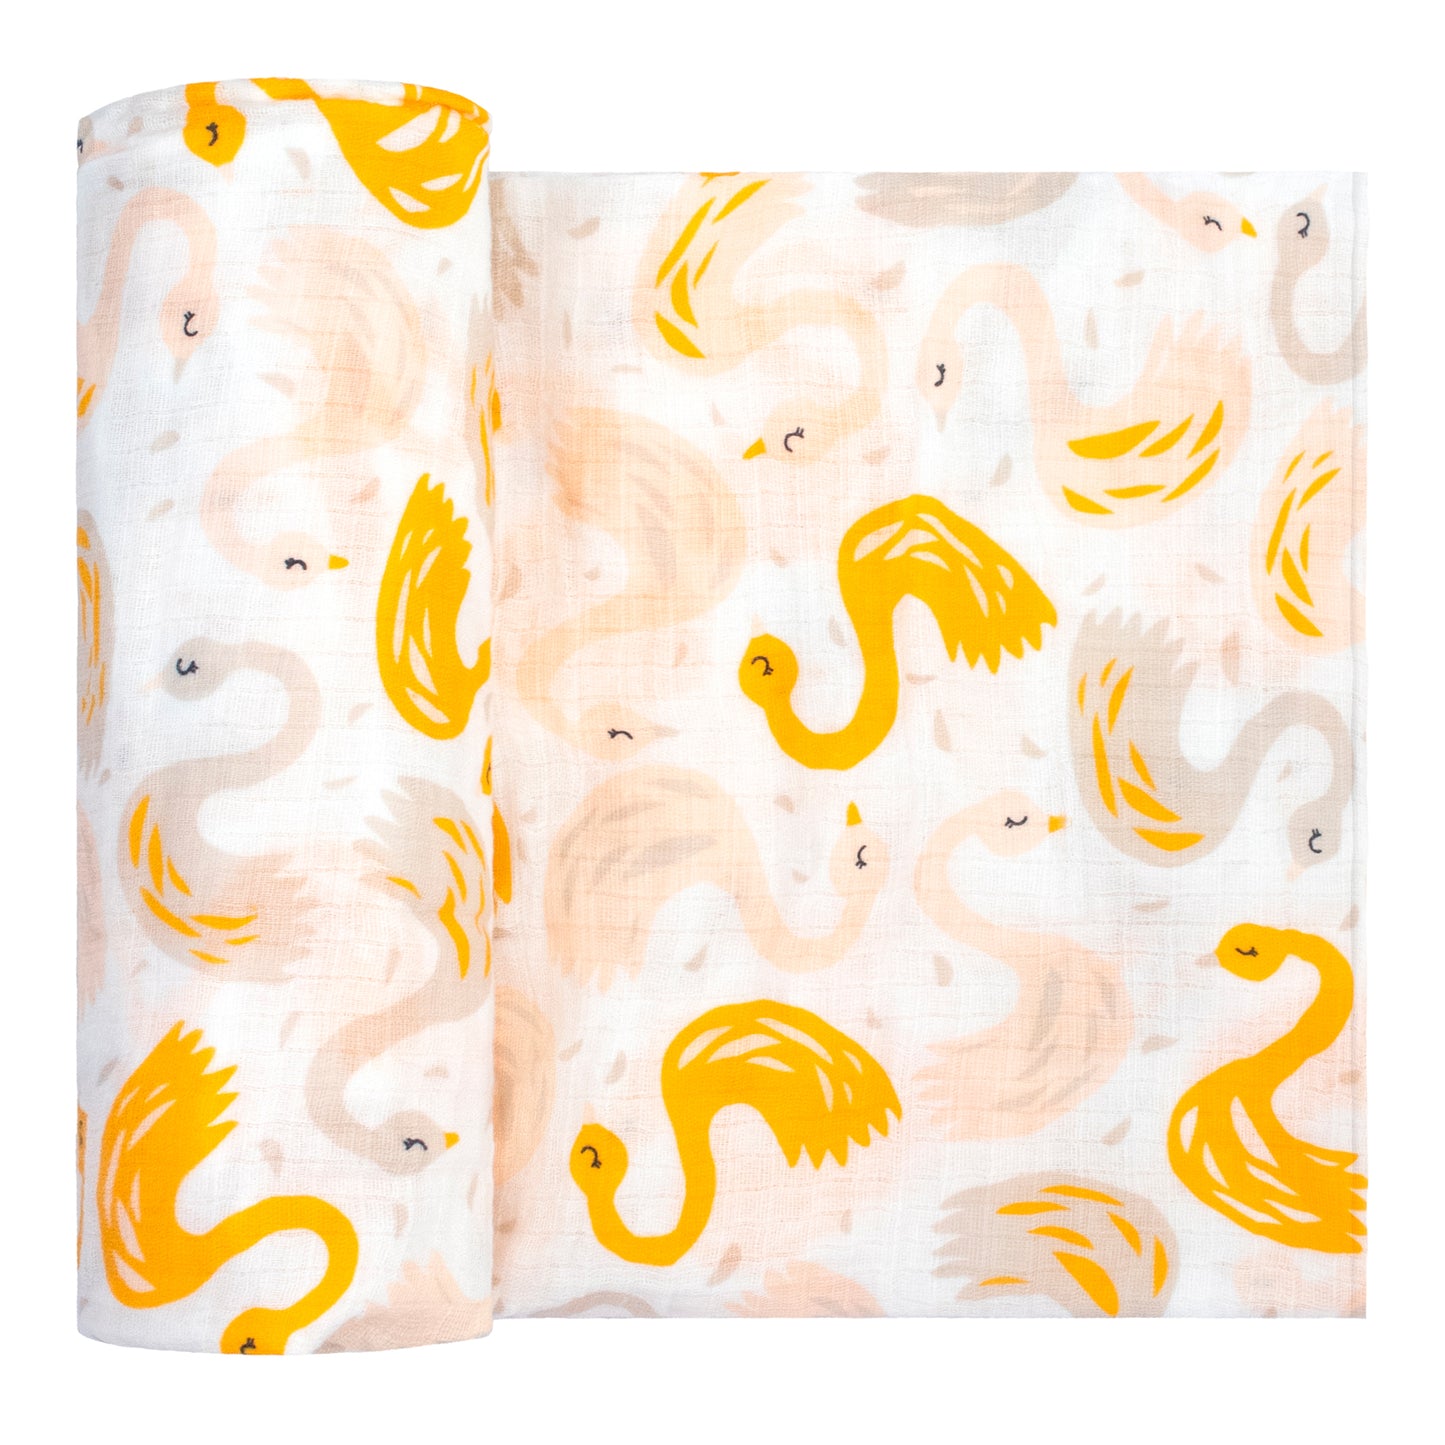 100% Cotton Luxury Muslin Swaddle Receiving Blanket for Girls and Boys, Unisex Yellow Birds, Swans